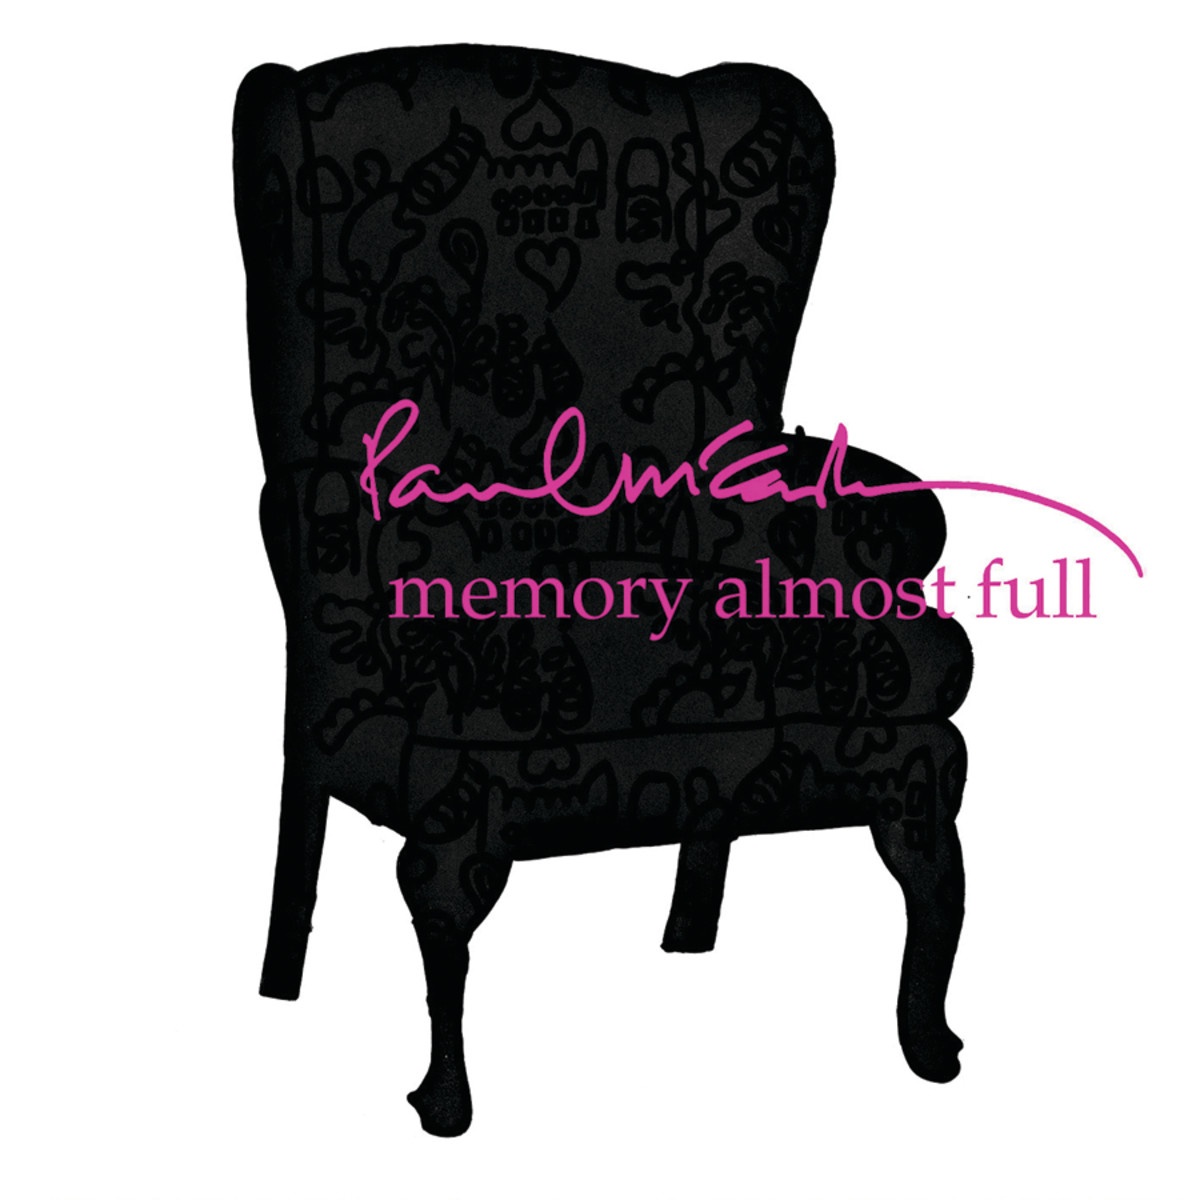 Paul talks about the music of Memory Almost Full